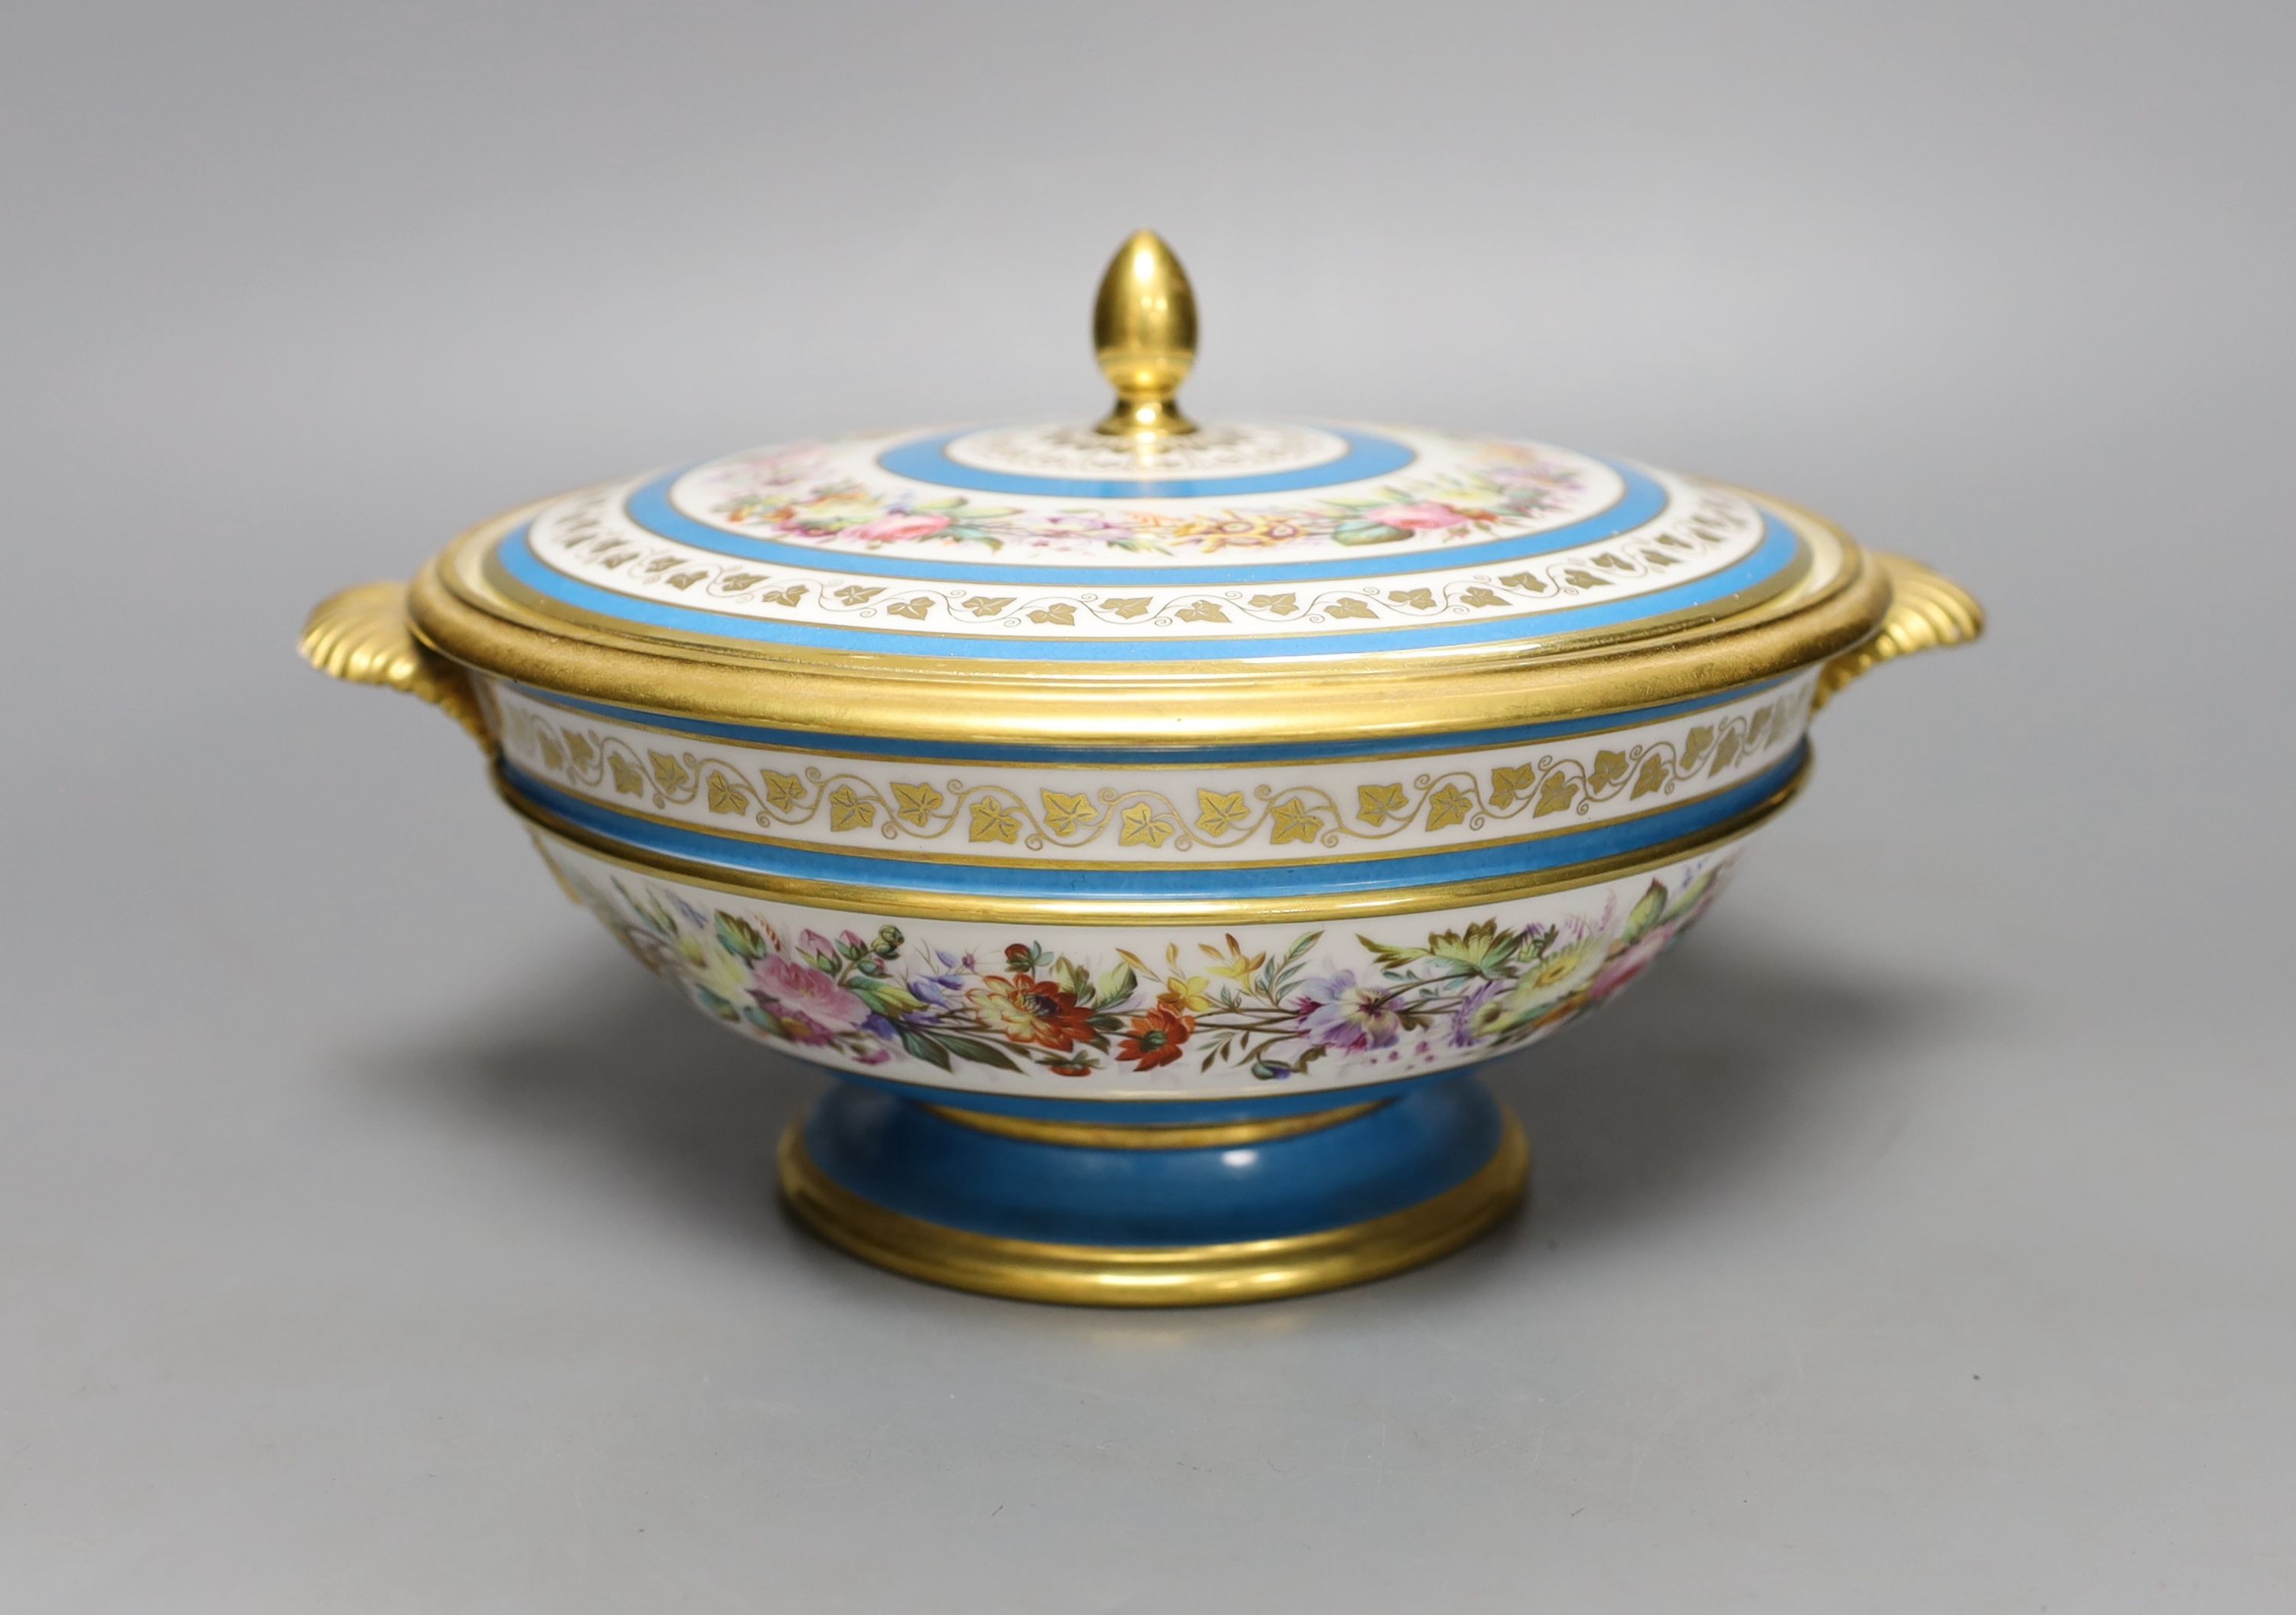 A Sevres ecuelle and cover, painted with a band of flowers surrounding the gilt monogram of Louis Phillipe, blue mark dated 1850, red mark for Chateau de Compiegne 25cm